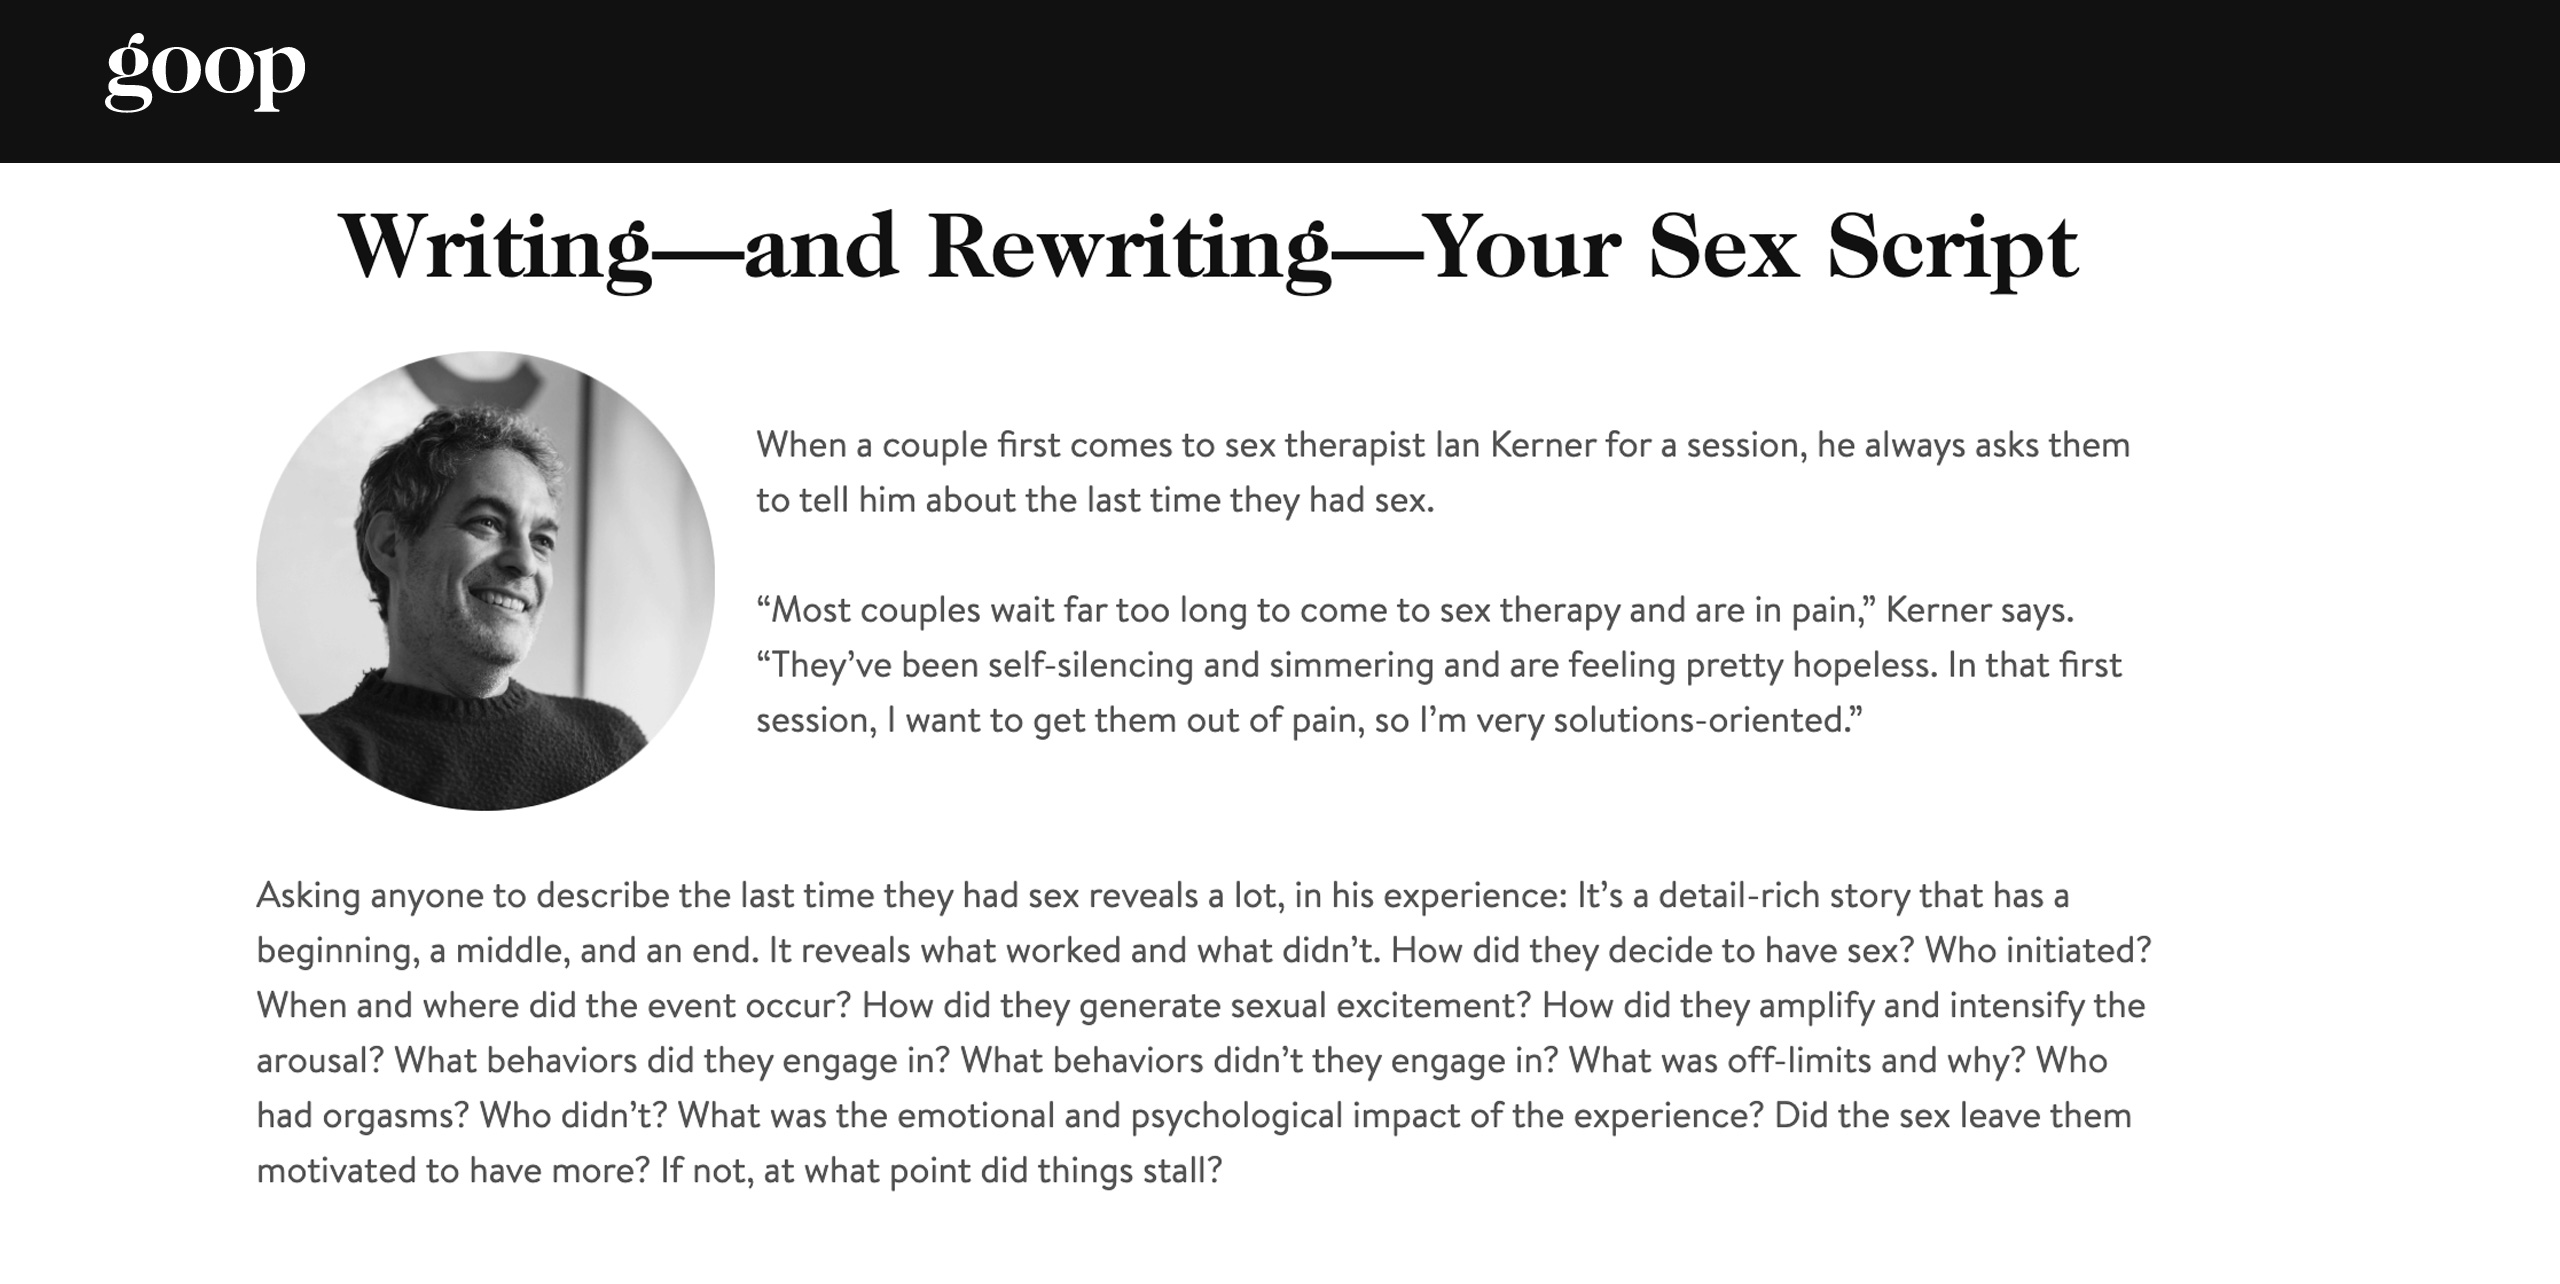 Writing—and Rewriting—Your Sex Script. A Q & A with Ian on the goop website